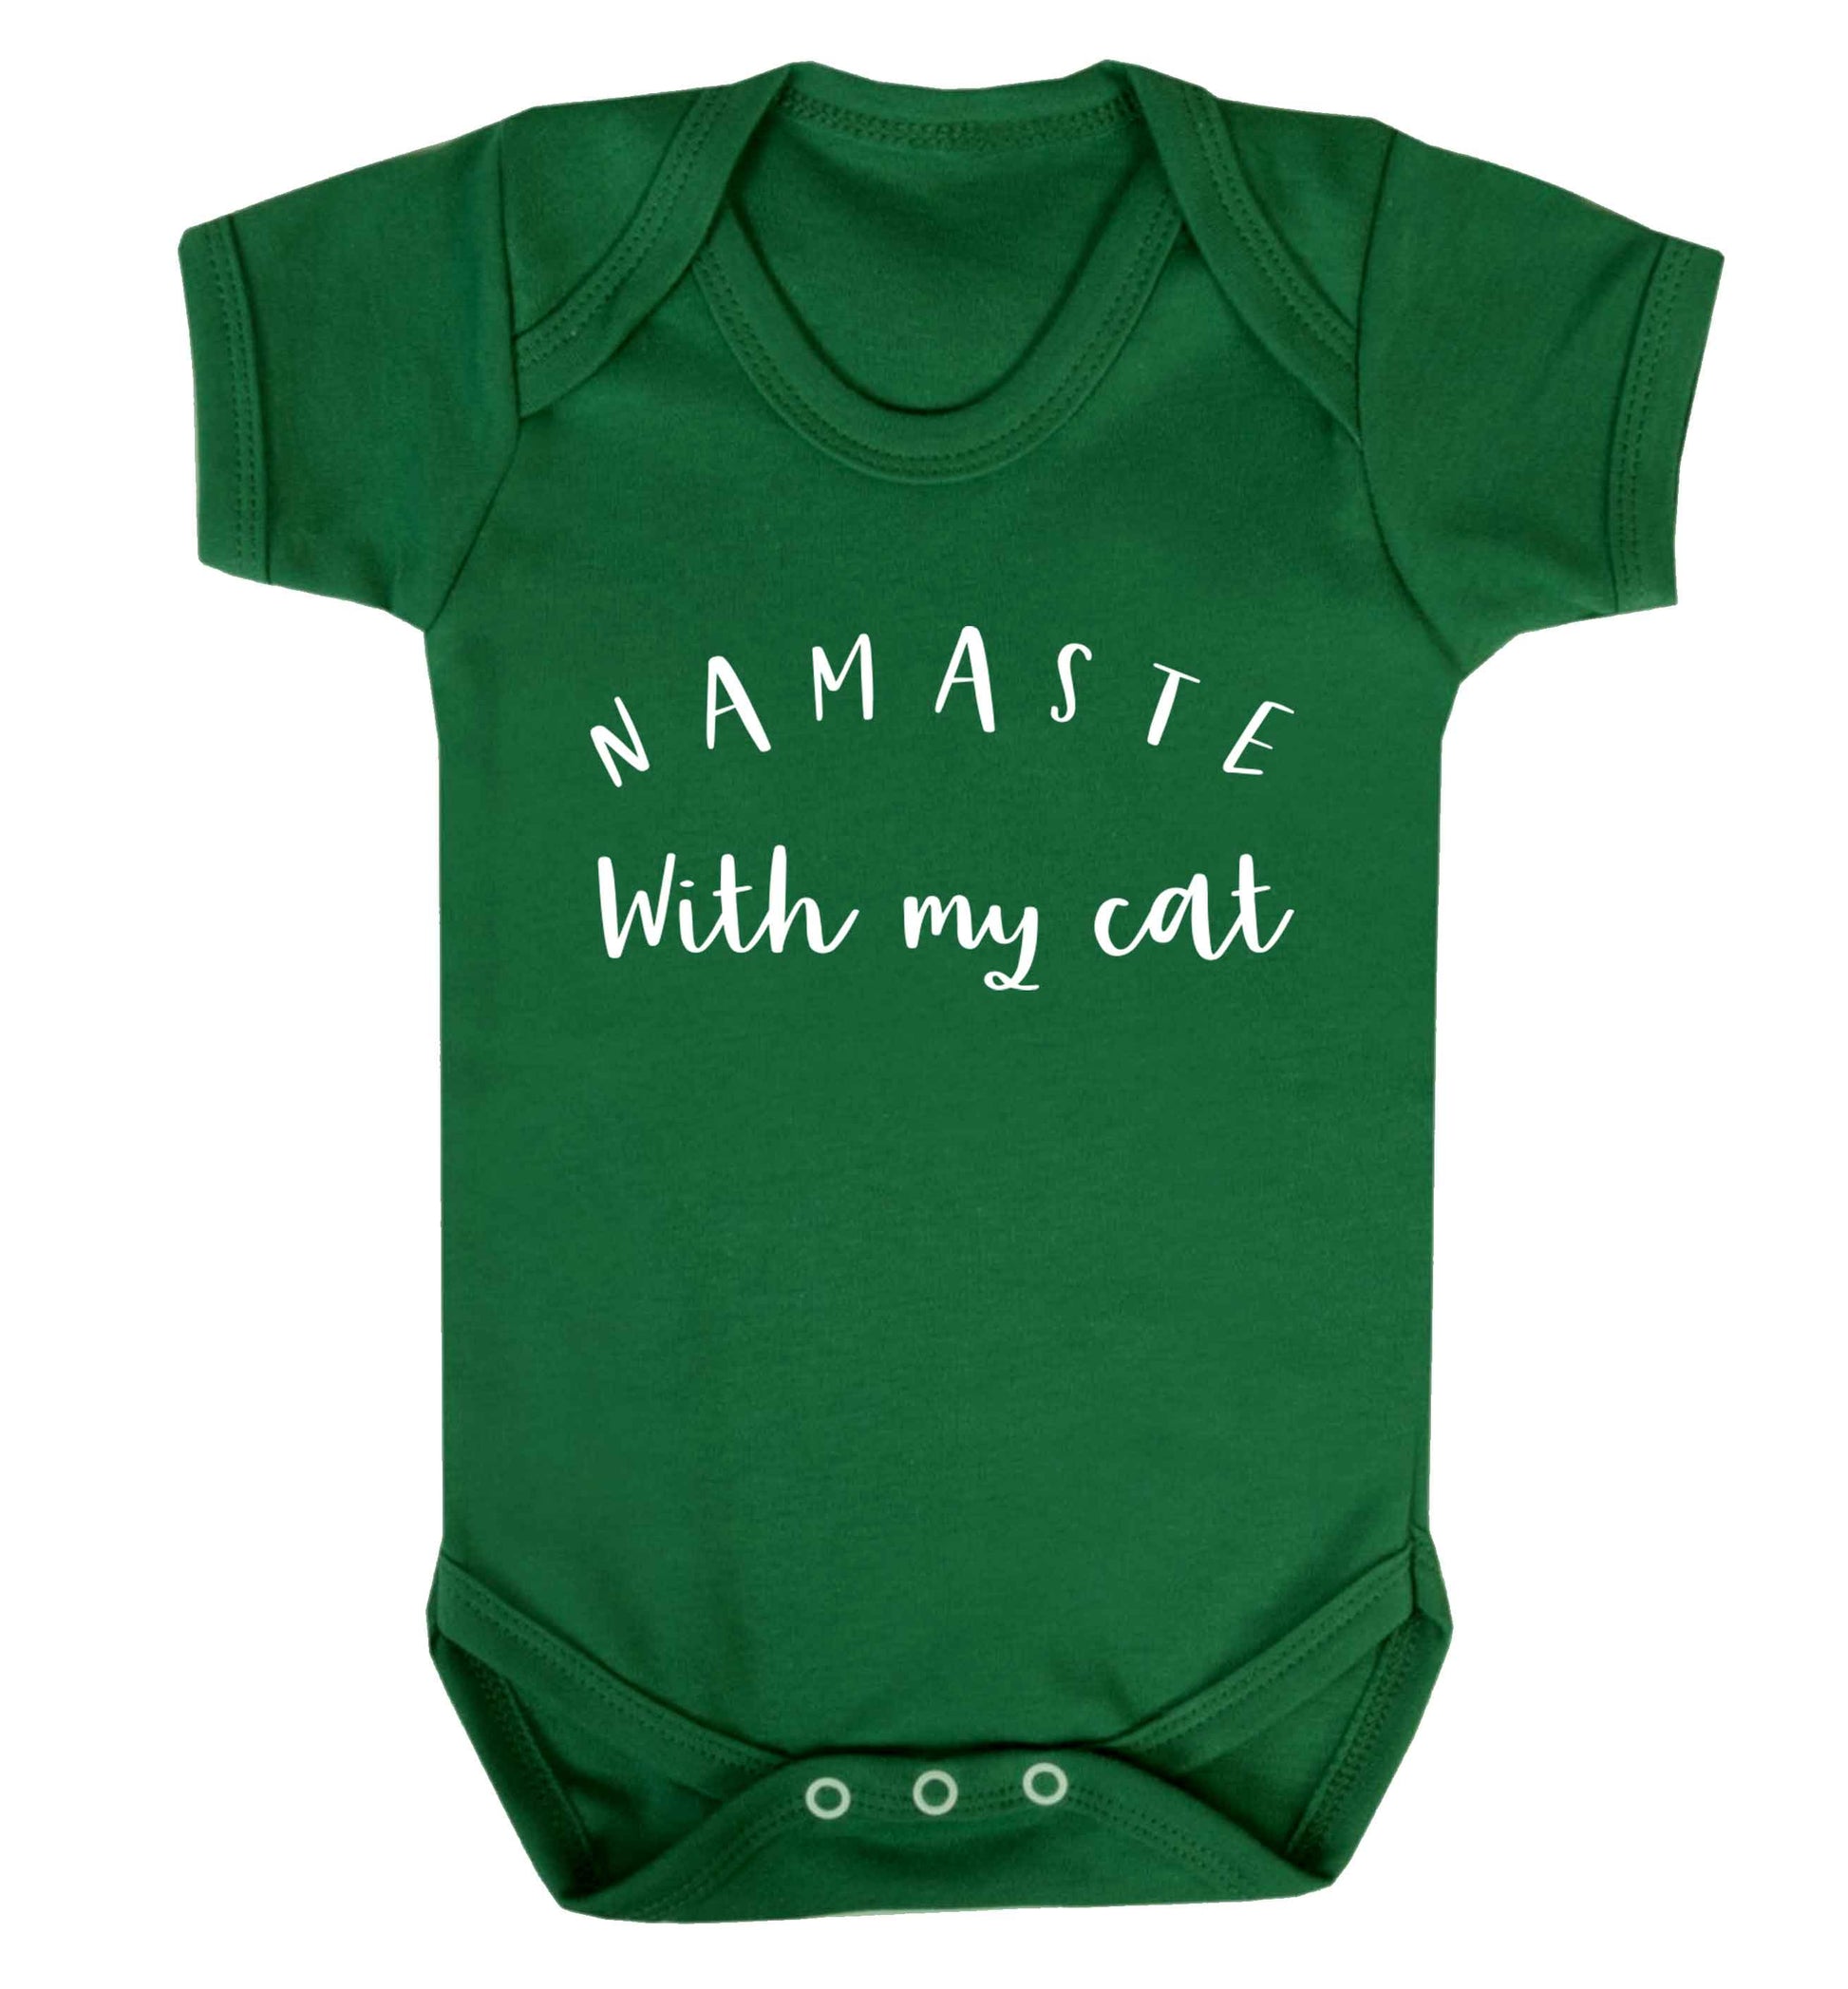 Namaste with my cat Baby Vest green 18-24 months